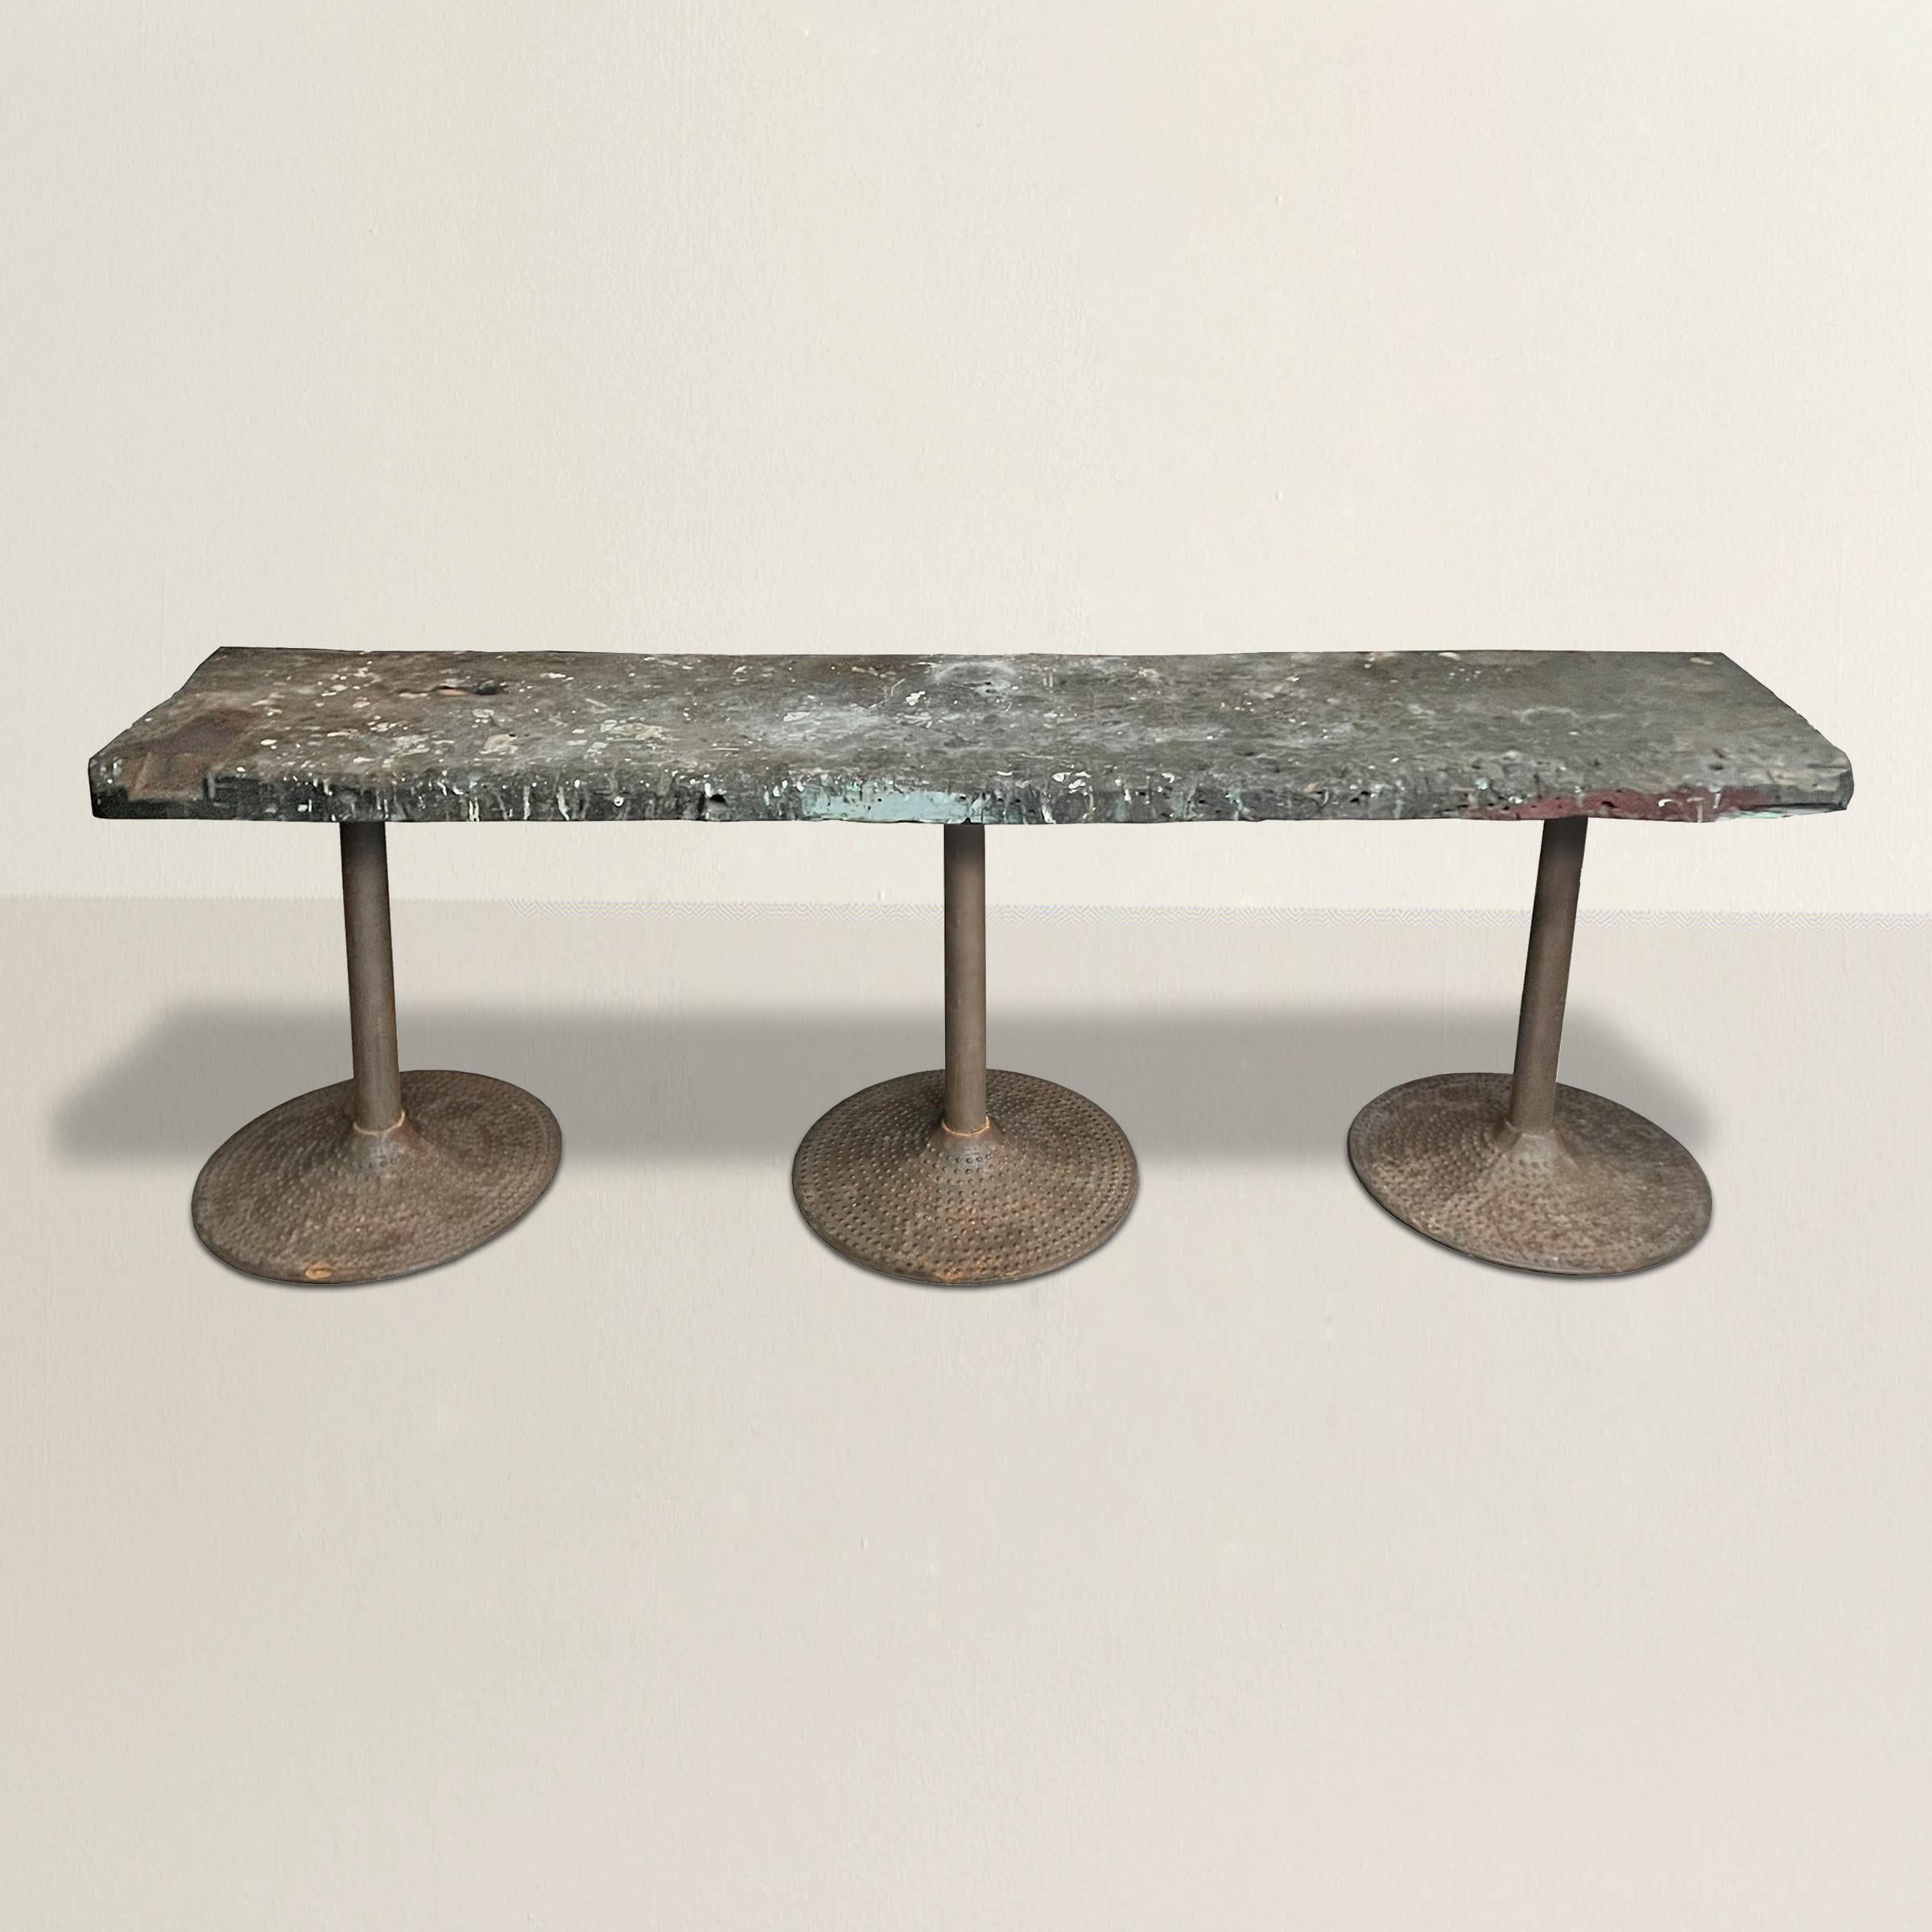 A strong and faithful early 20th century American industrial work table with the most incredible wooden top with myriad cut, saw, hammer, and paint marks from over a hundred years of use, and mounted on three cast iron pedestal legs with ribbed